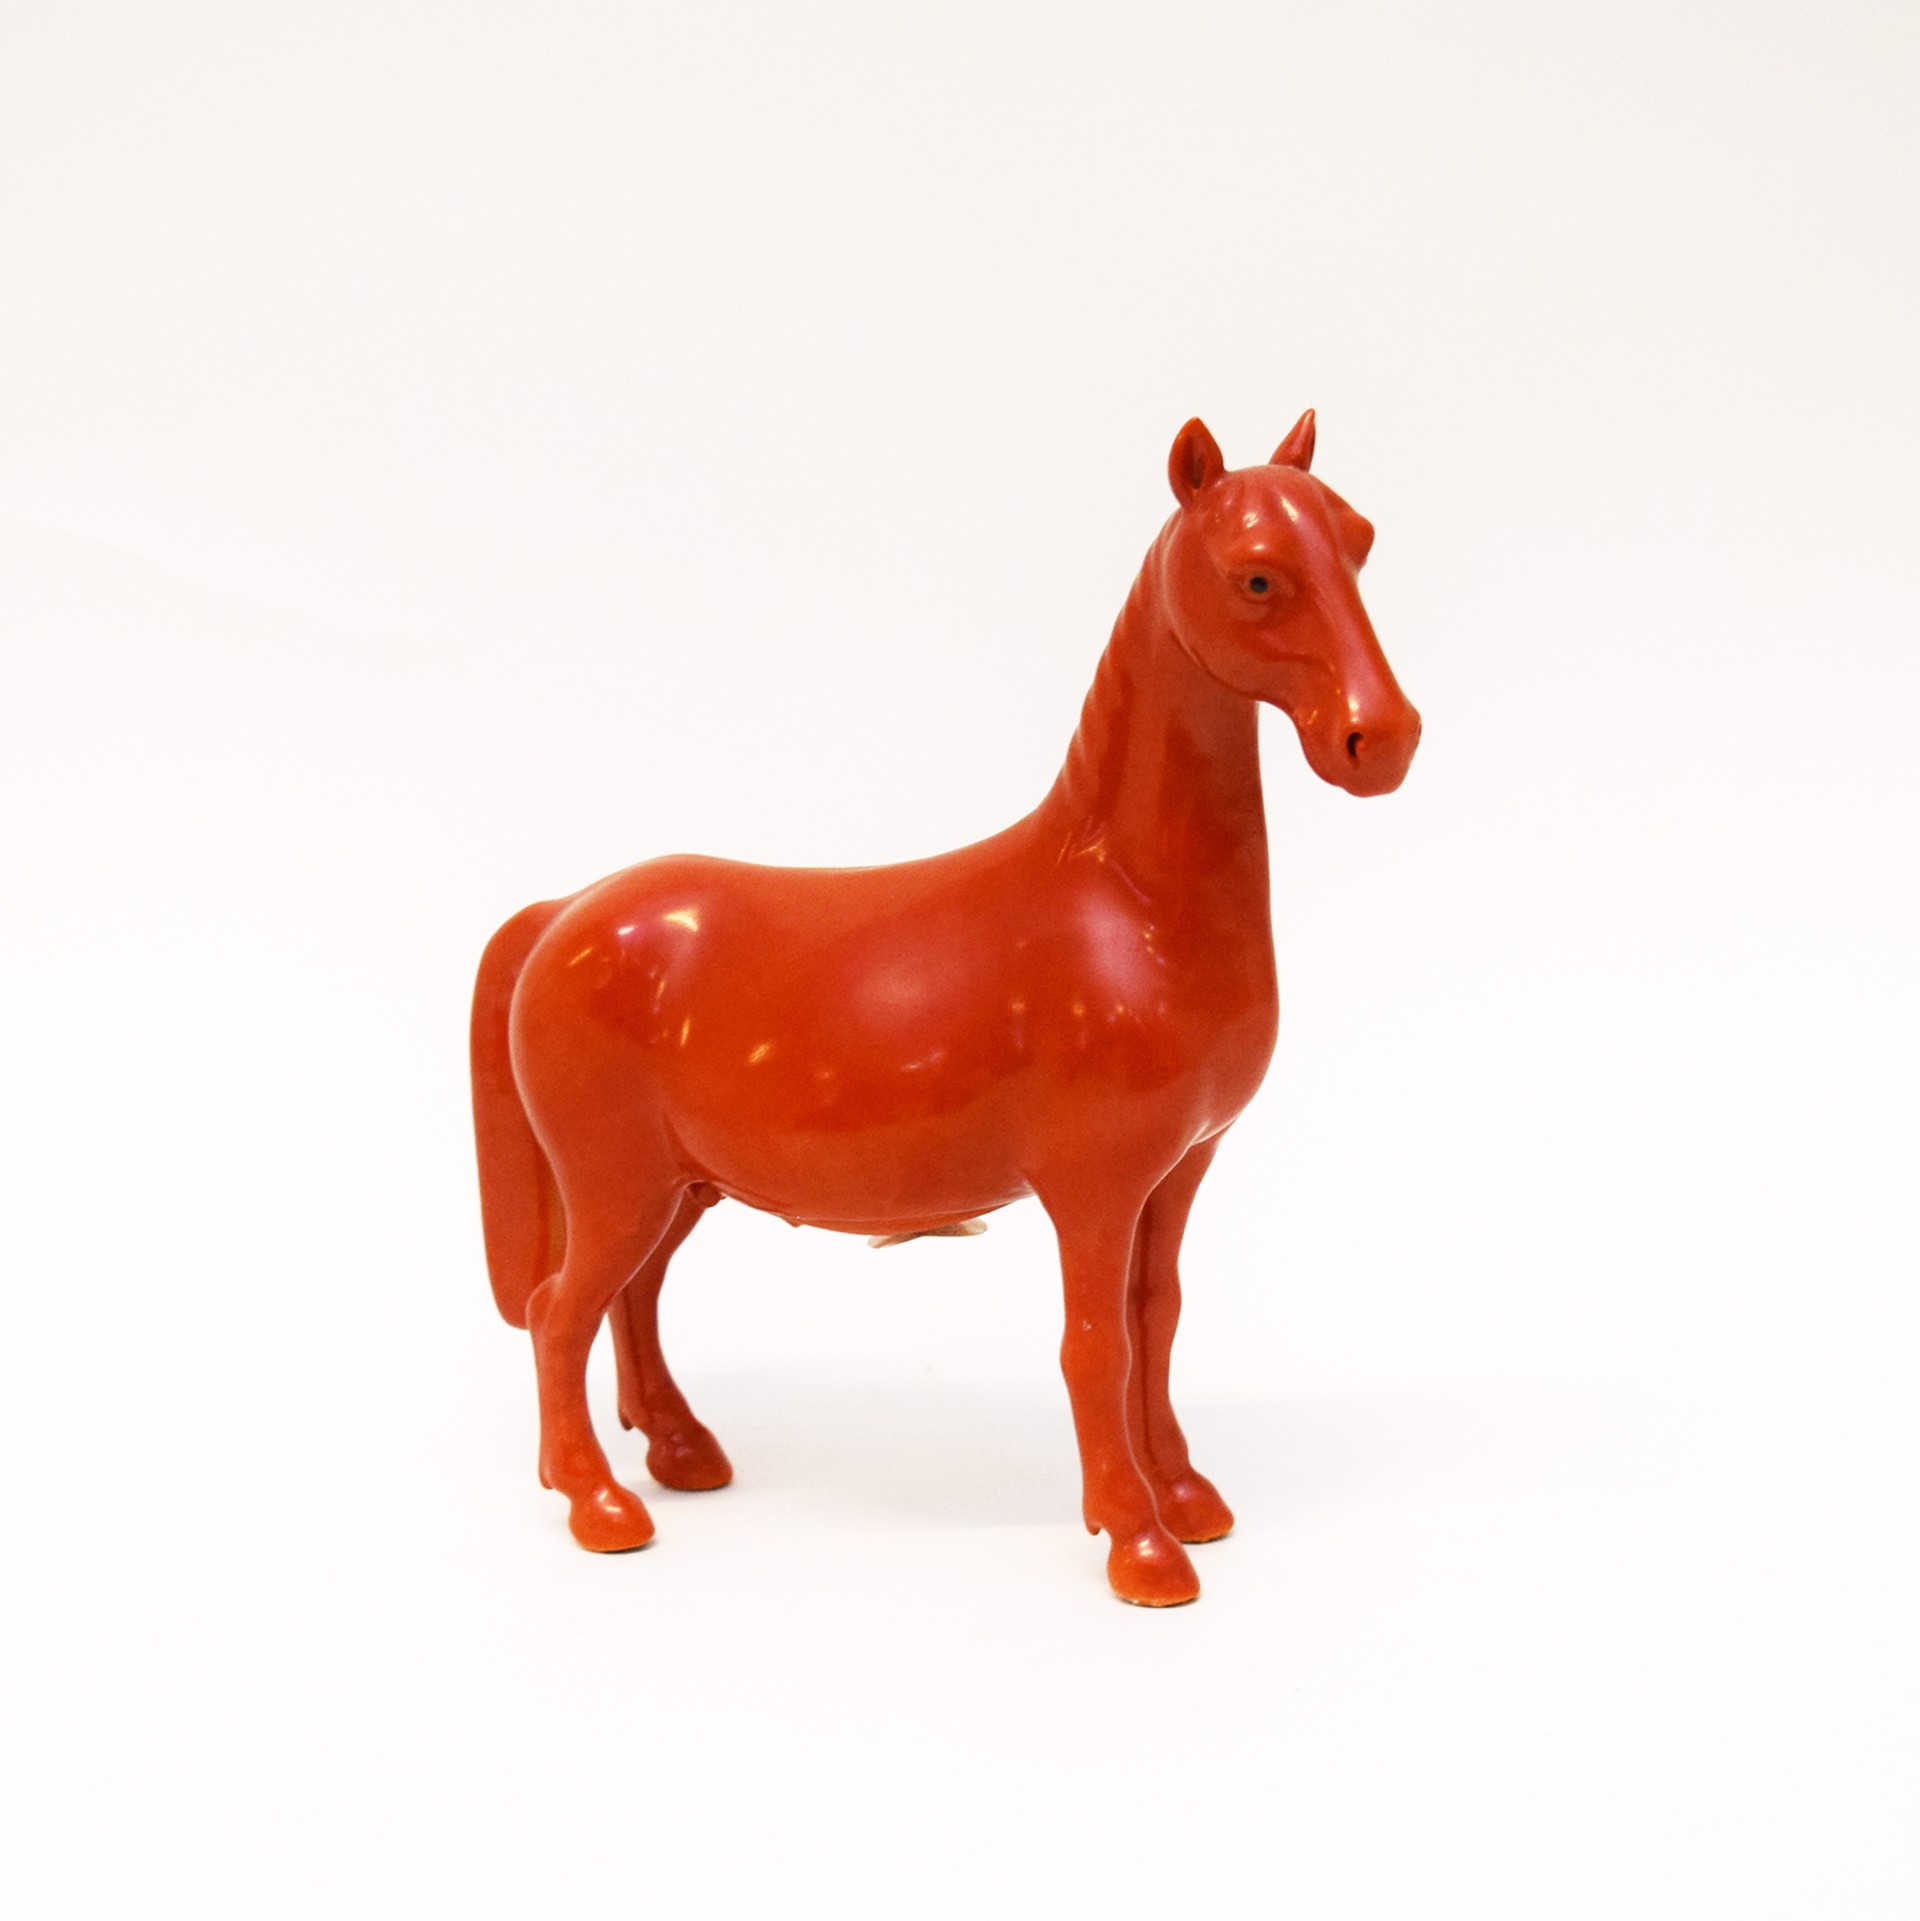 SMALL RED EXPORT FIGURE OF A HORSE